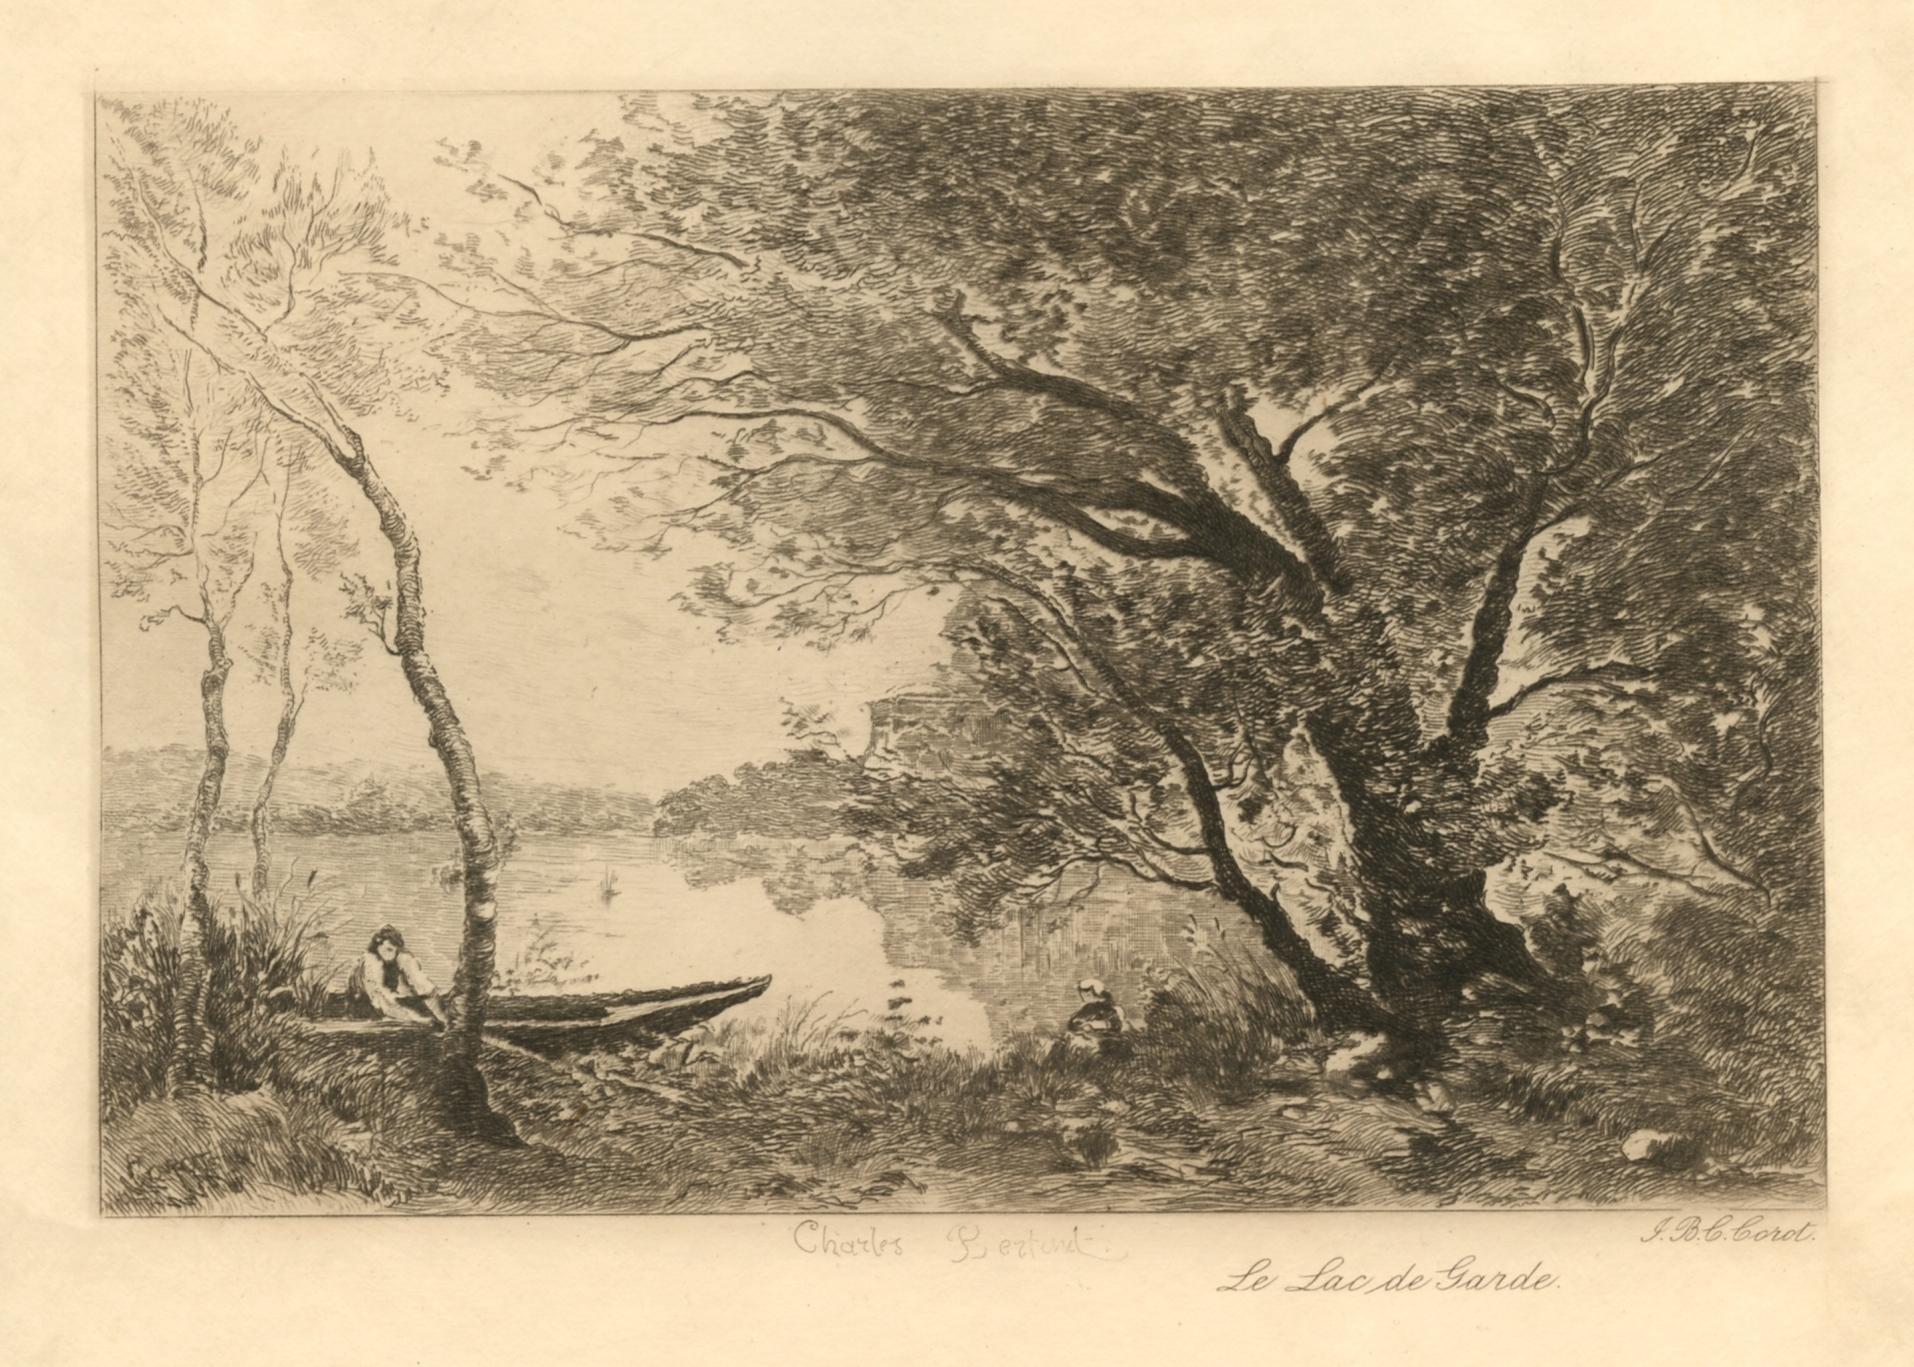 "Le Lac de Garde" etching - Print by (after) Jean-Baptiste-Camille Corot